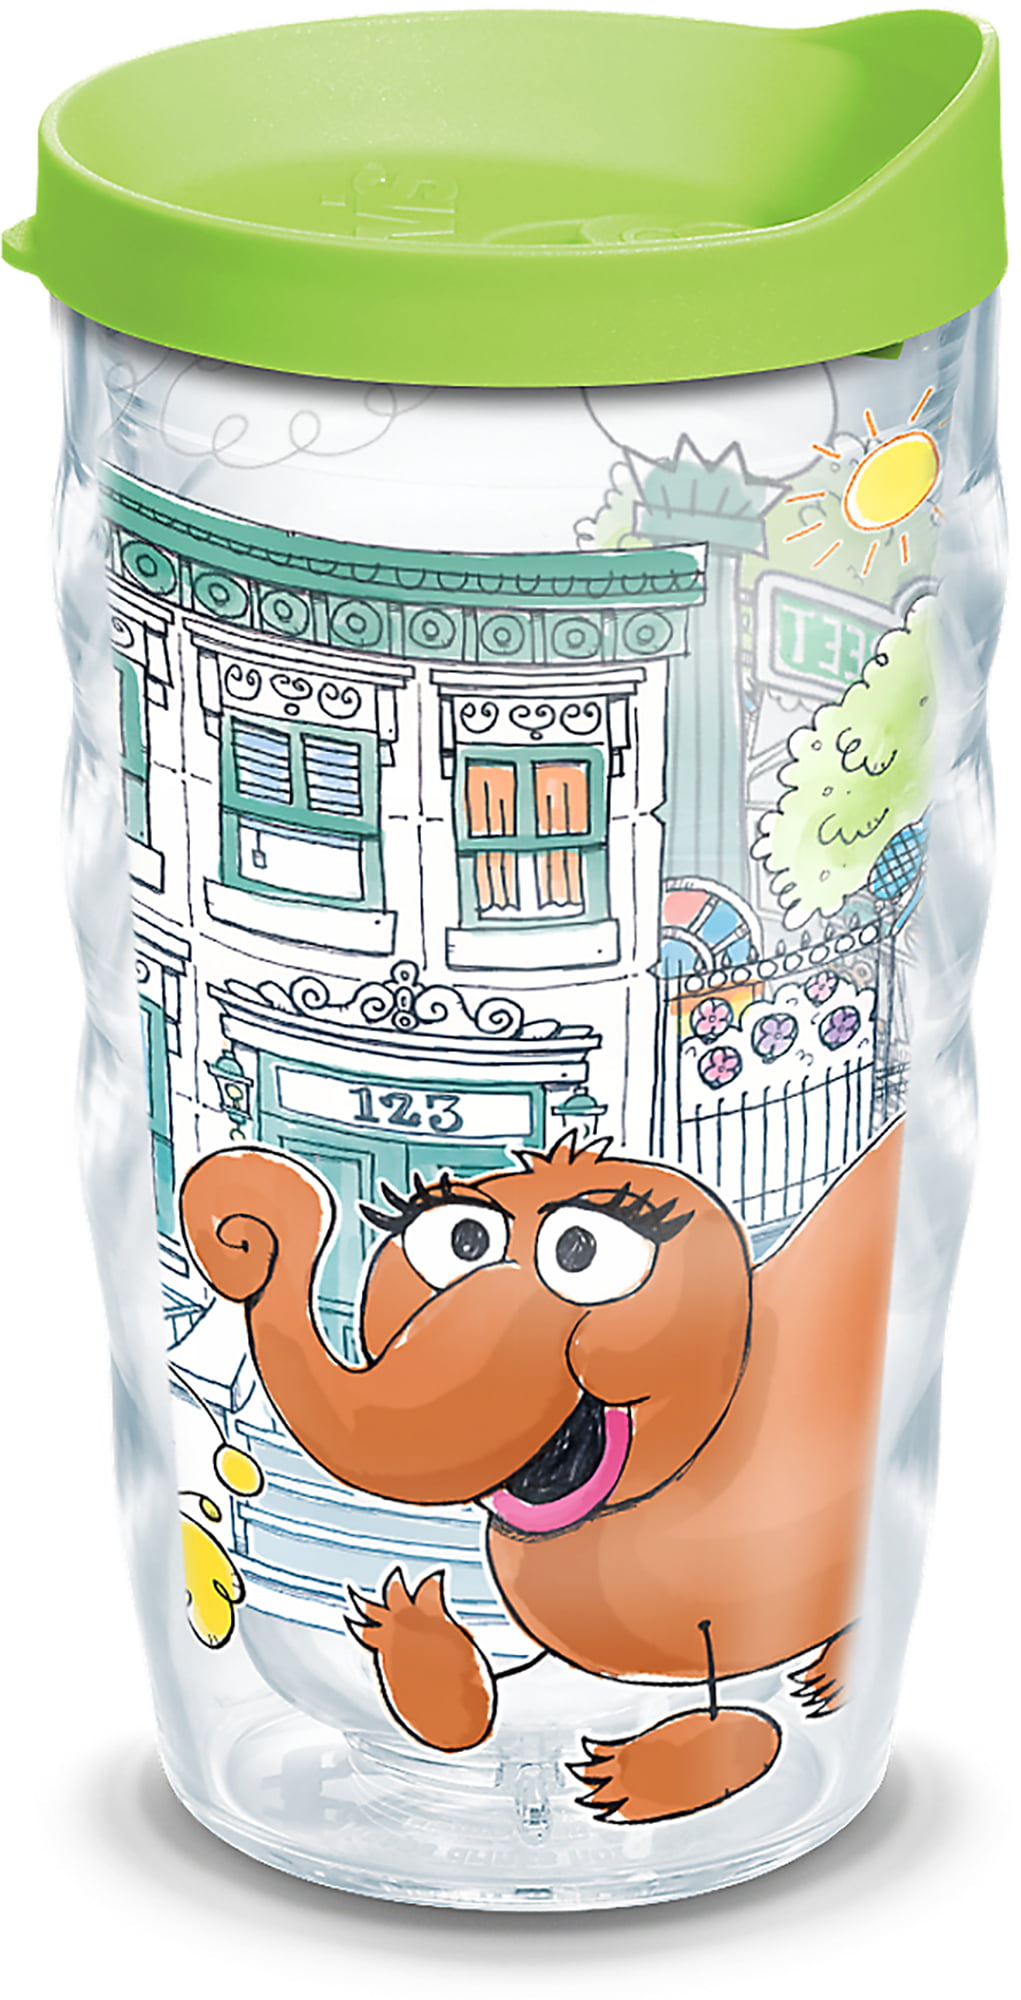 24oz Tervis Made in USA Double Walled Sesame Street Insulated Tumbler Cup Keeps Drinks Cold & Hot Original Group 